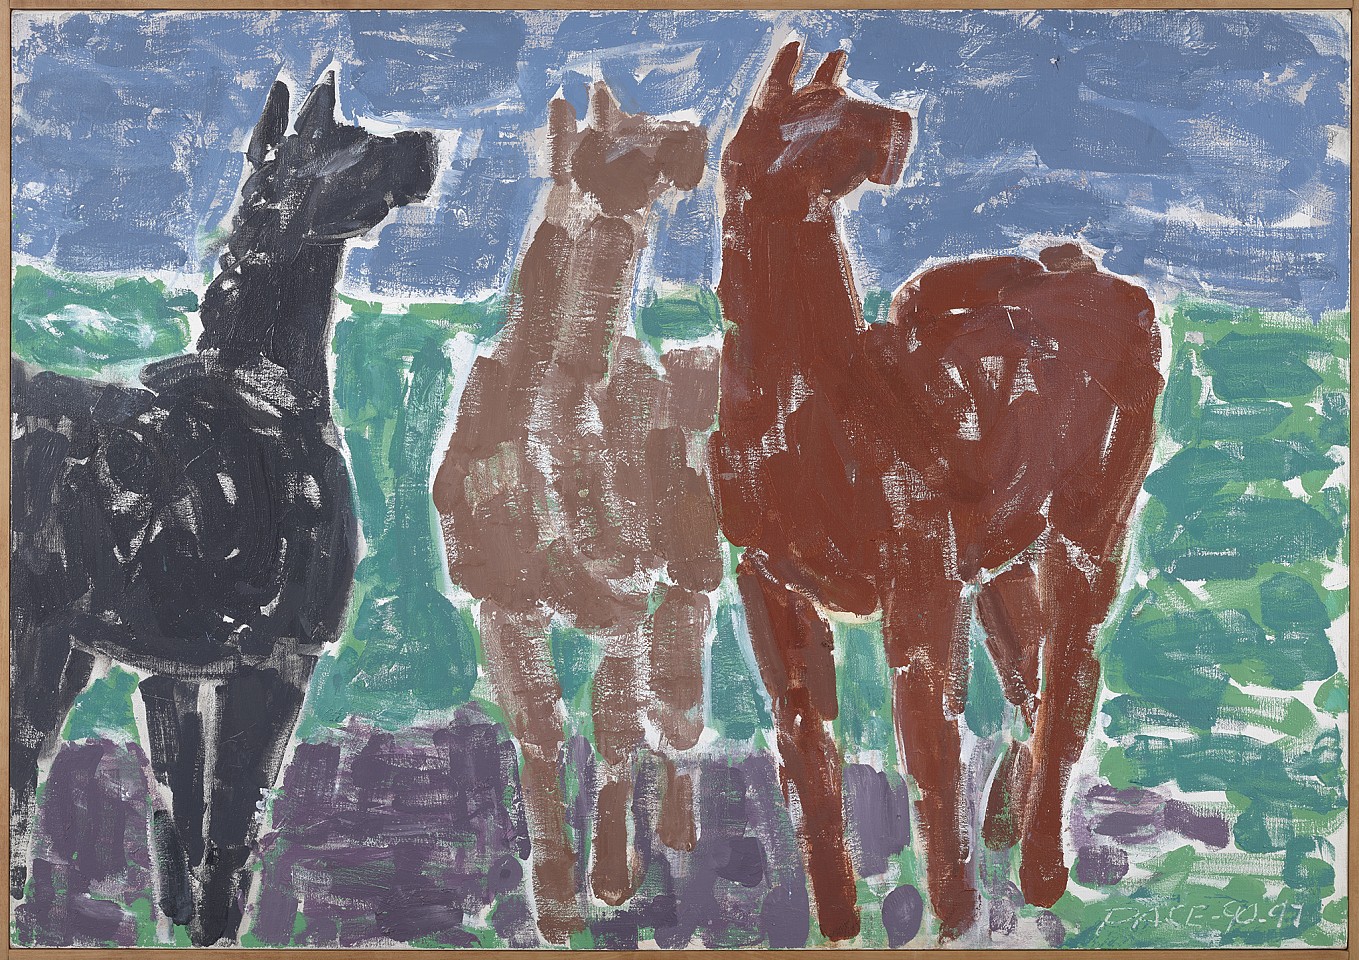 Stephen Pace, Black Horse/Brown Horse, 1990-98
Oil on canvas, 42 x 60 in. (106.7 x 152.4 cm)
PAC-00233